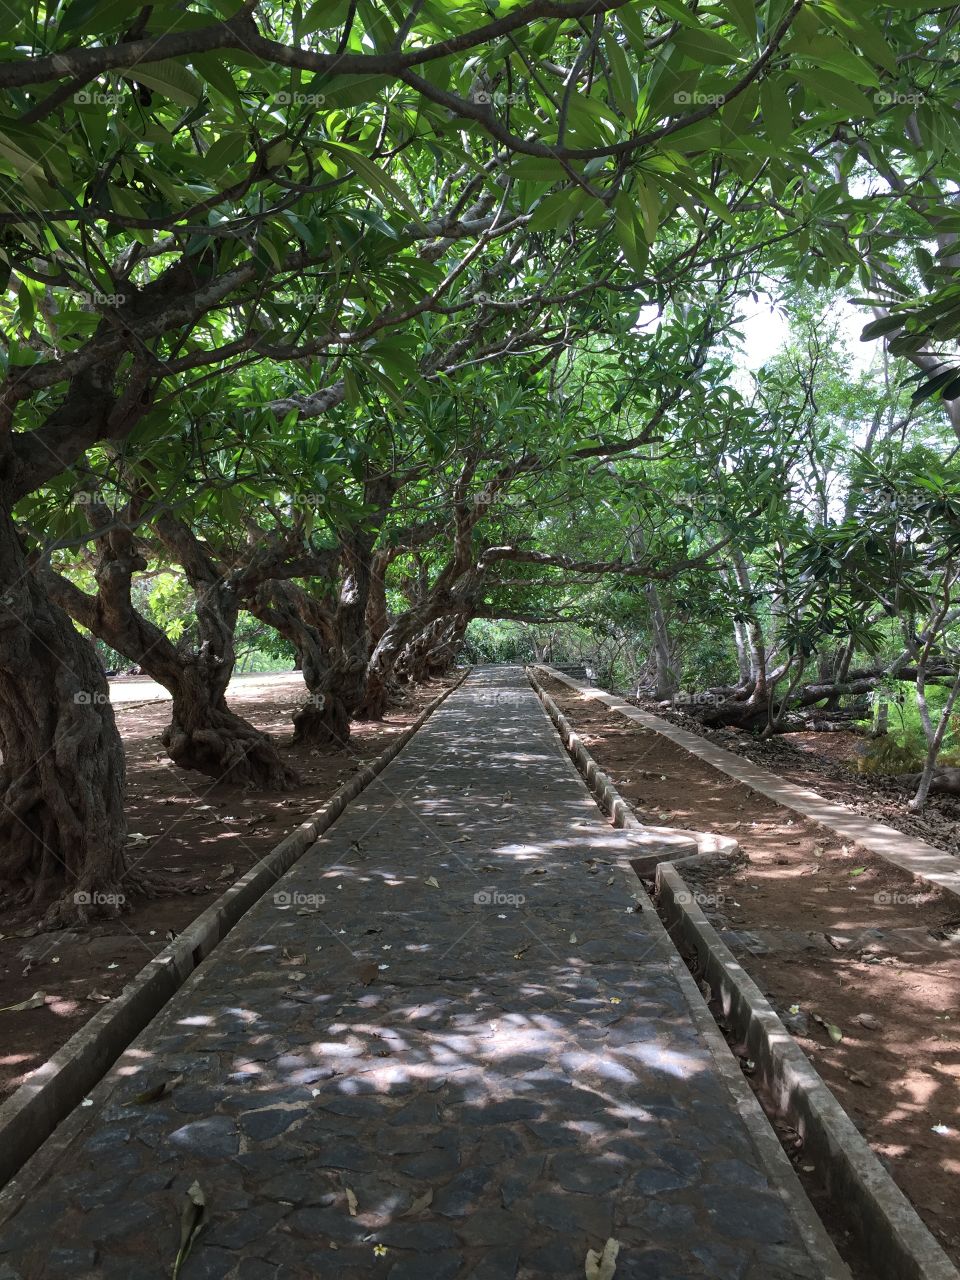 A tree lined path gave a welcome break from the Thai sun